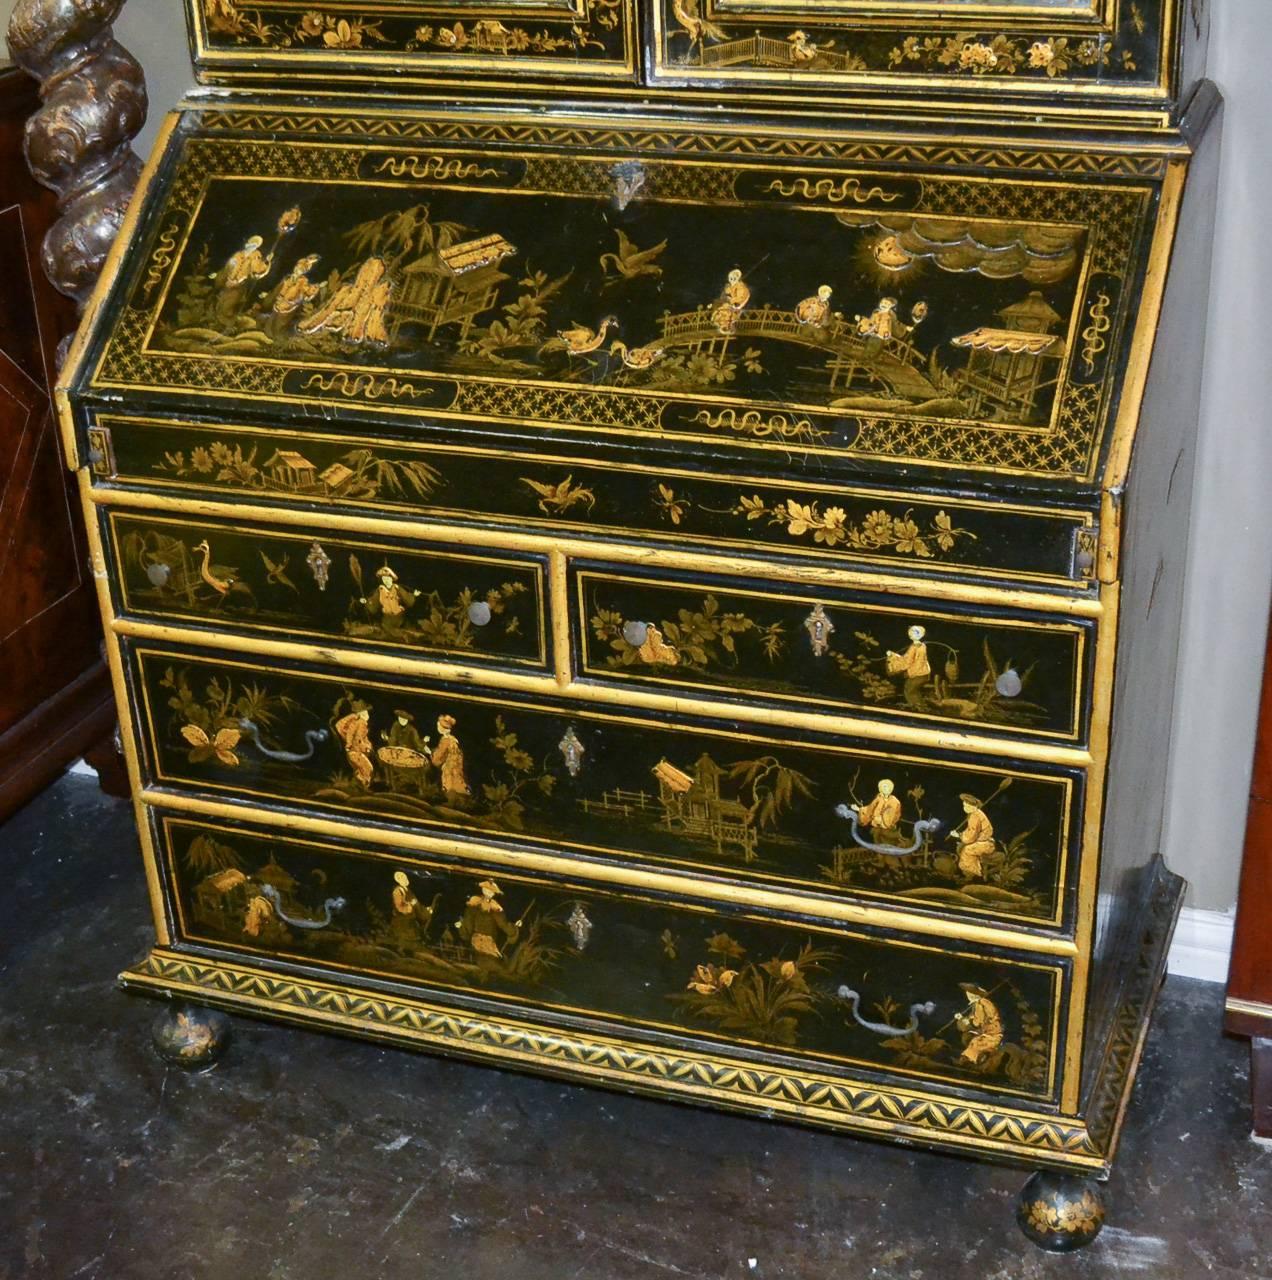 Fantastic 19th century English black lacquered chinoiserie five-drawer secretary. Having wonderful oriental scenes with figures and fauna, original beveled mirrored glass in doors, and resting on ball feet. 